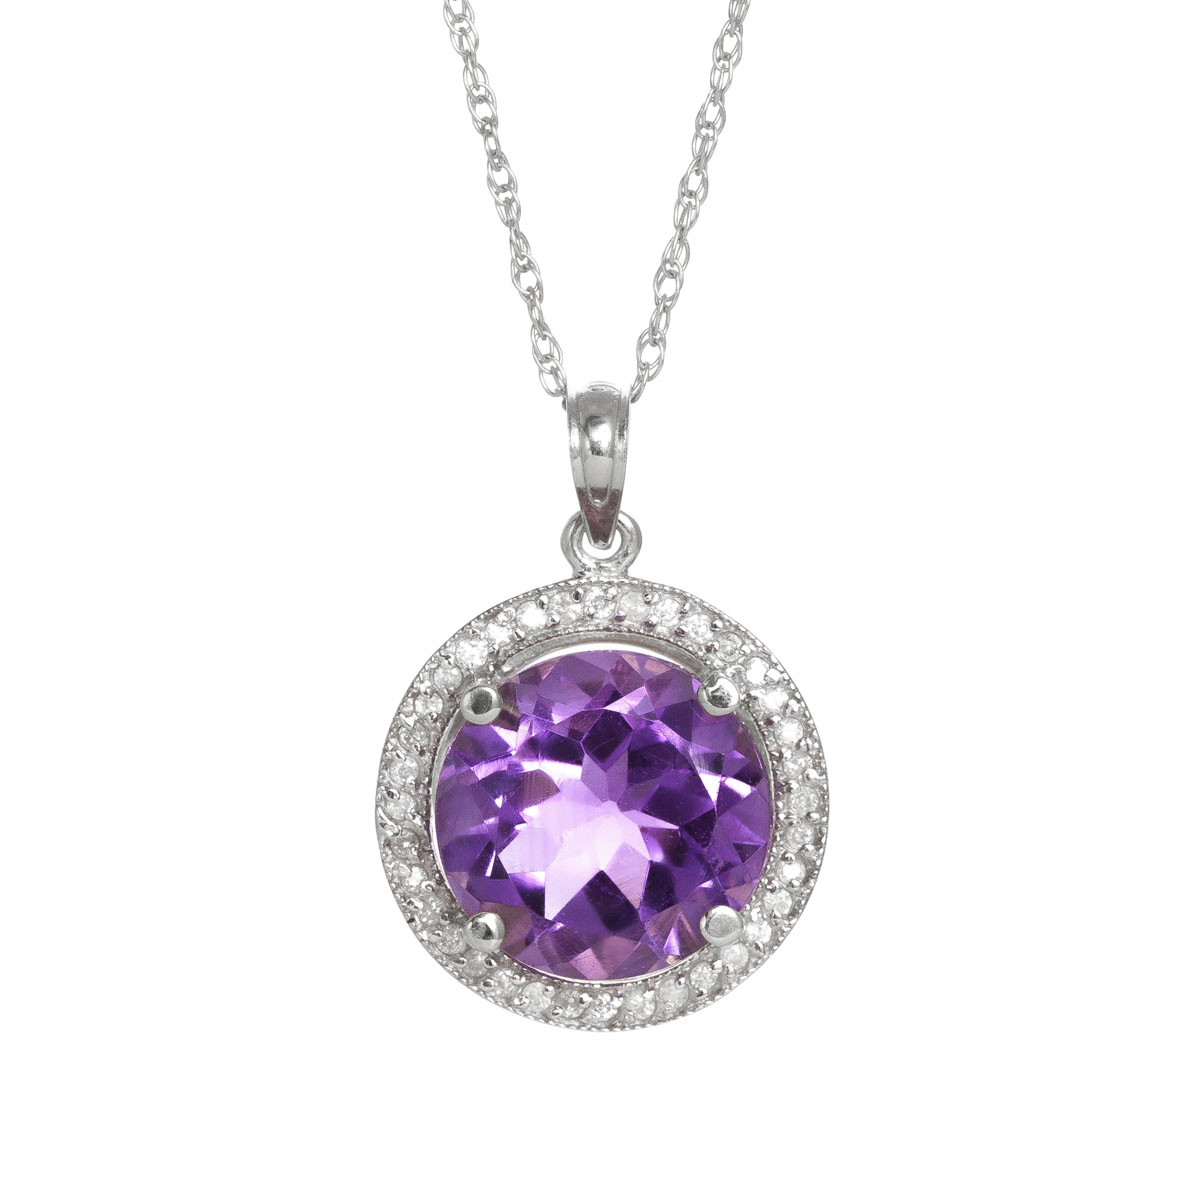 Amethyst Halo Pendant Necklace 6.2 ctw in 9ct White Gold